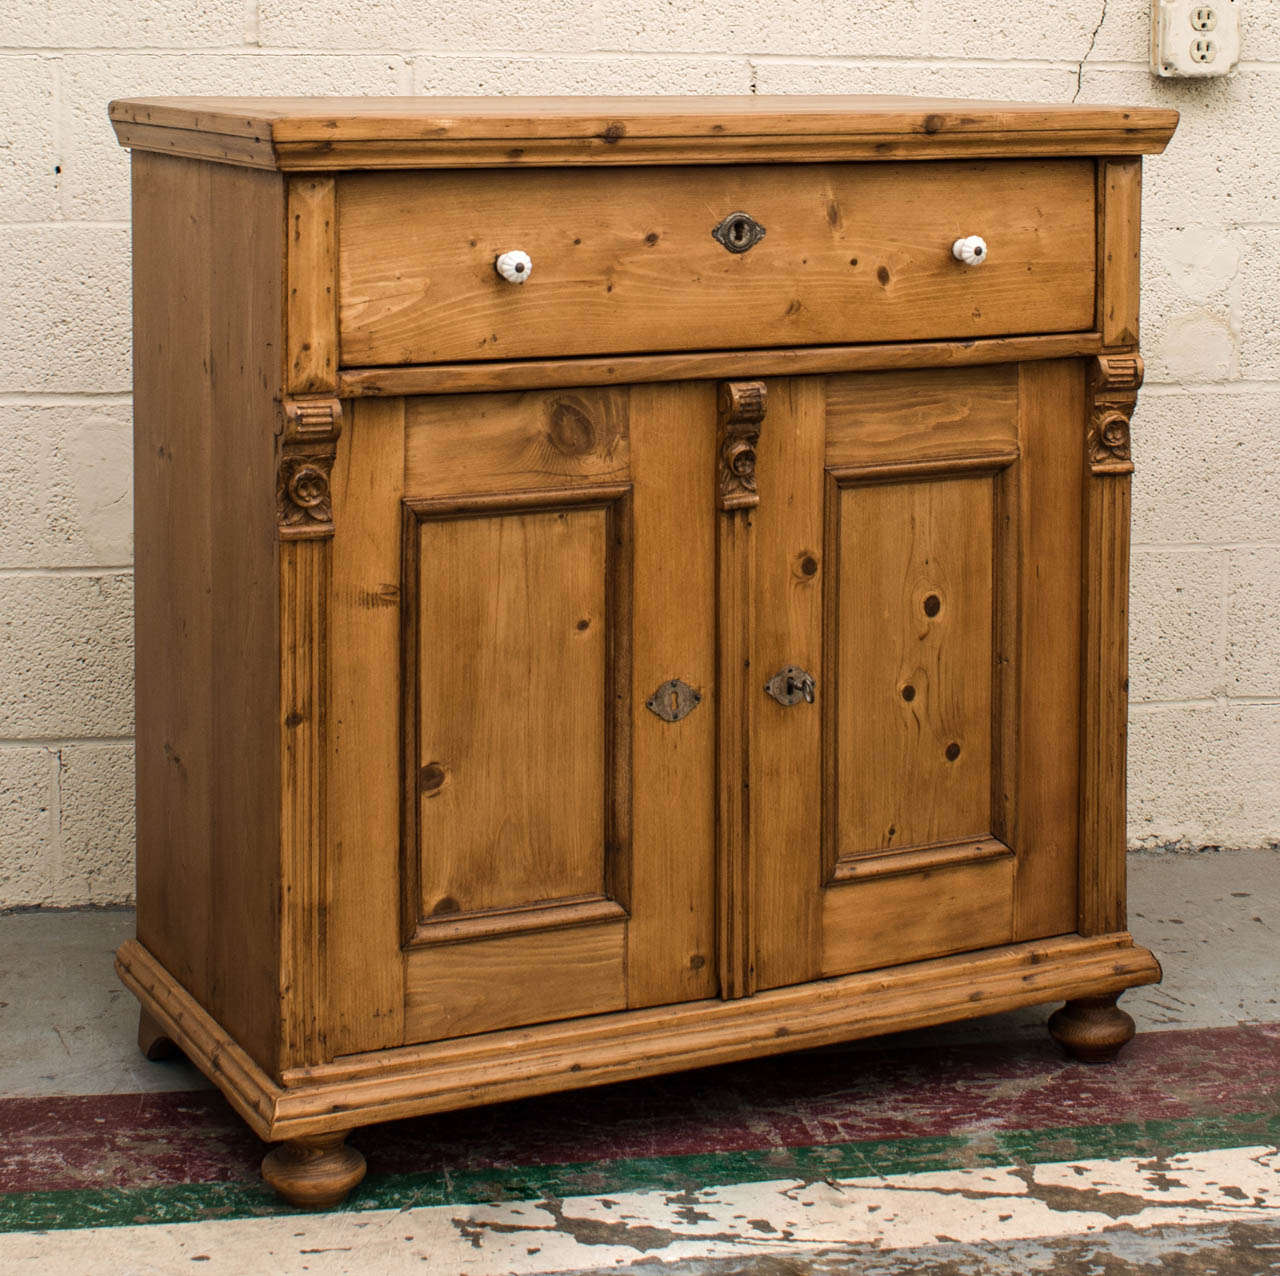 An attractive dresser base featuring a single hand-cut dovetailed drawer above two panelled doors, flanked and divided by fluted molding and unusual hand-carved floral corbels. Original ceramic pulls and nickel escutcheons.  Great as a compact